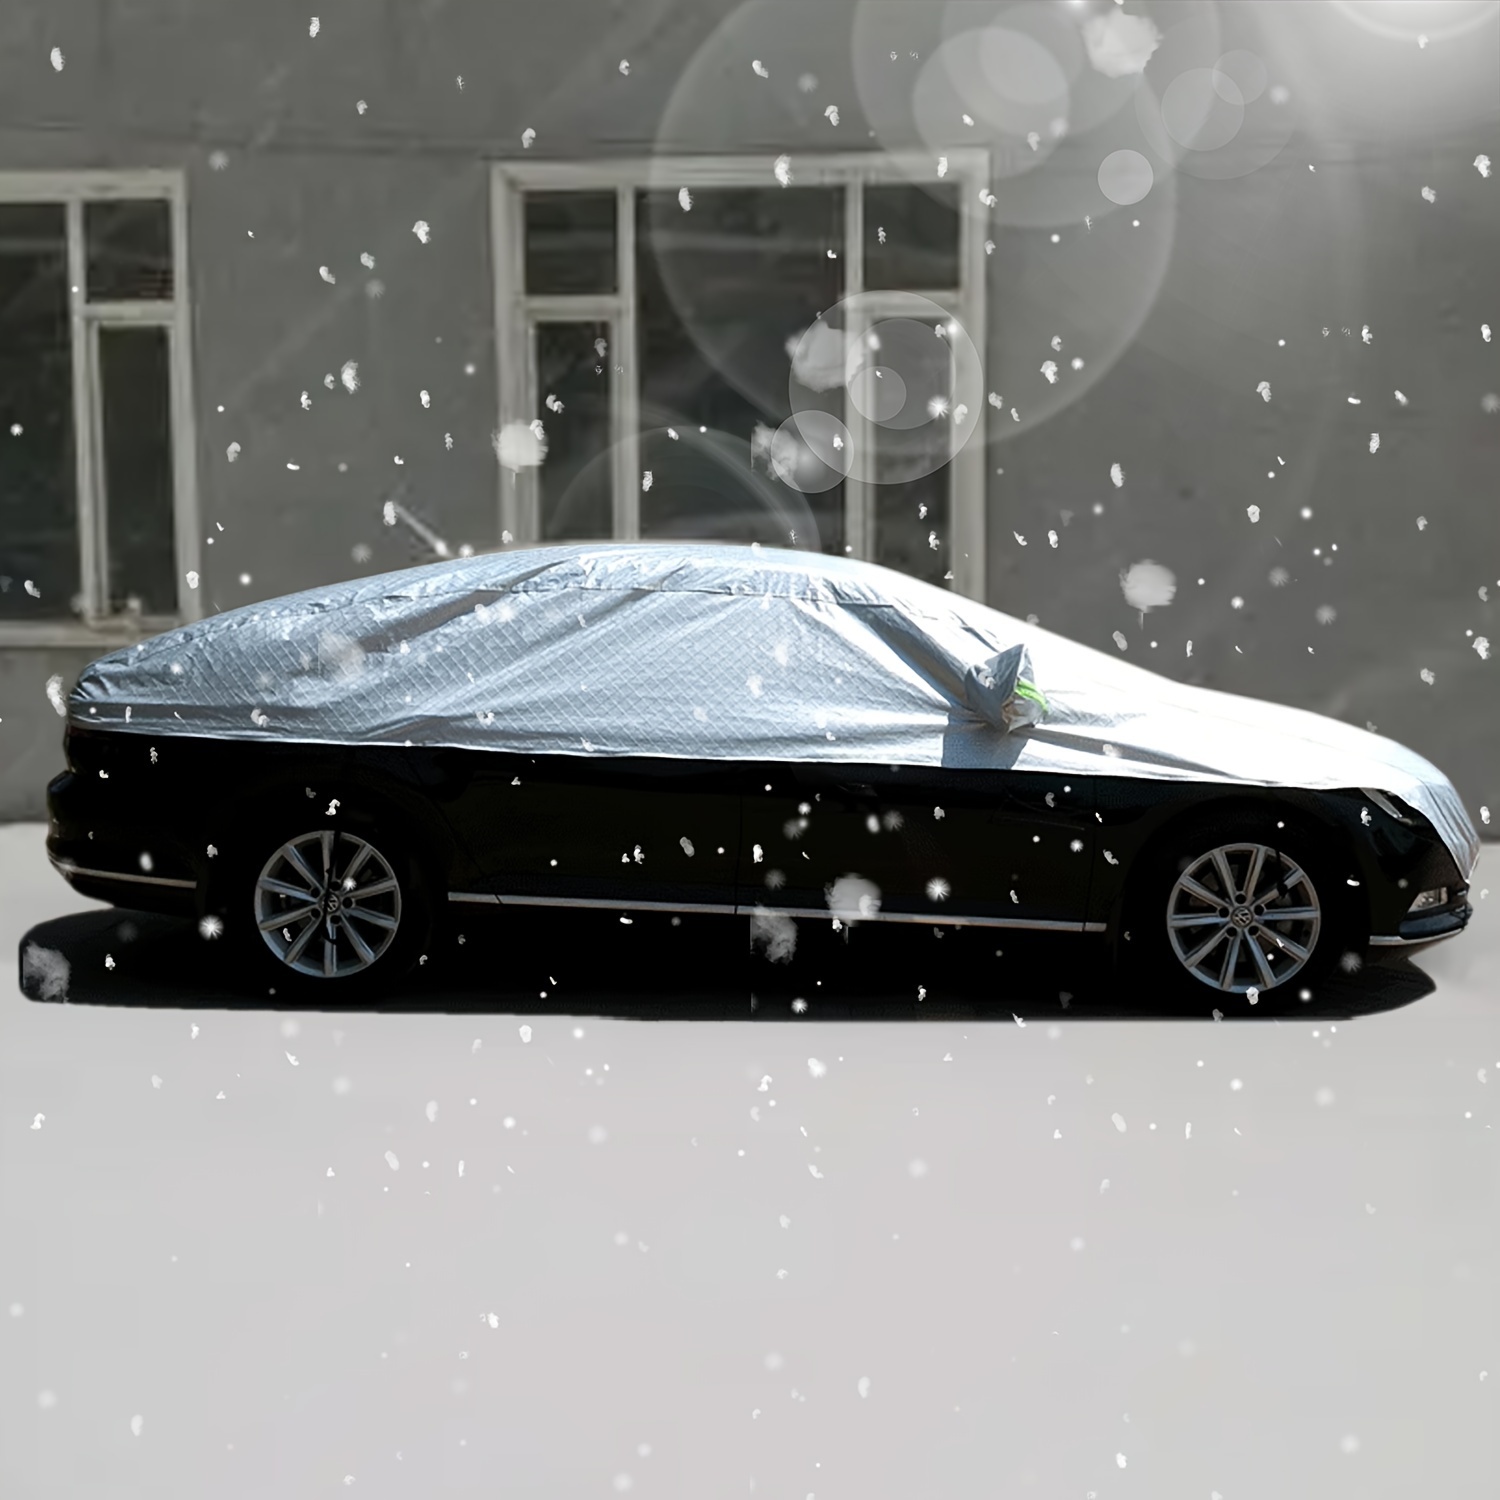 Half Car Cover With Cotton All Weather Car Body Covers Outdoor Indoor For  All Season Waterproof Dustproof Uv Resistant Snowproof Universal Fit Sedan2